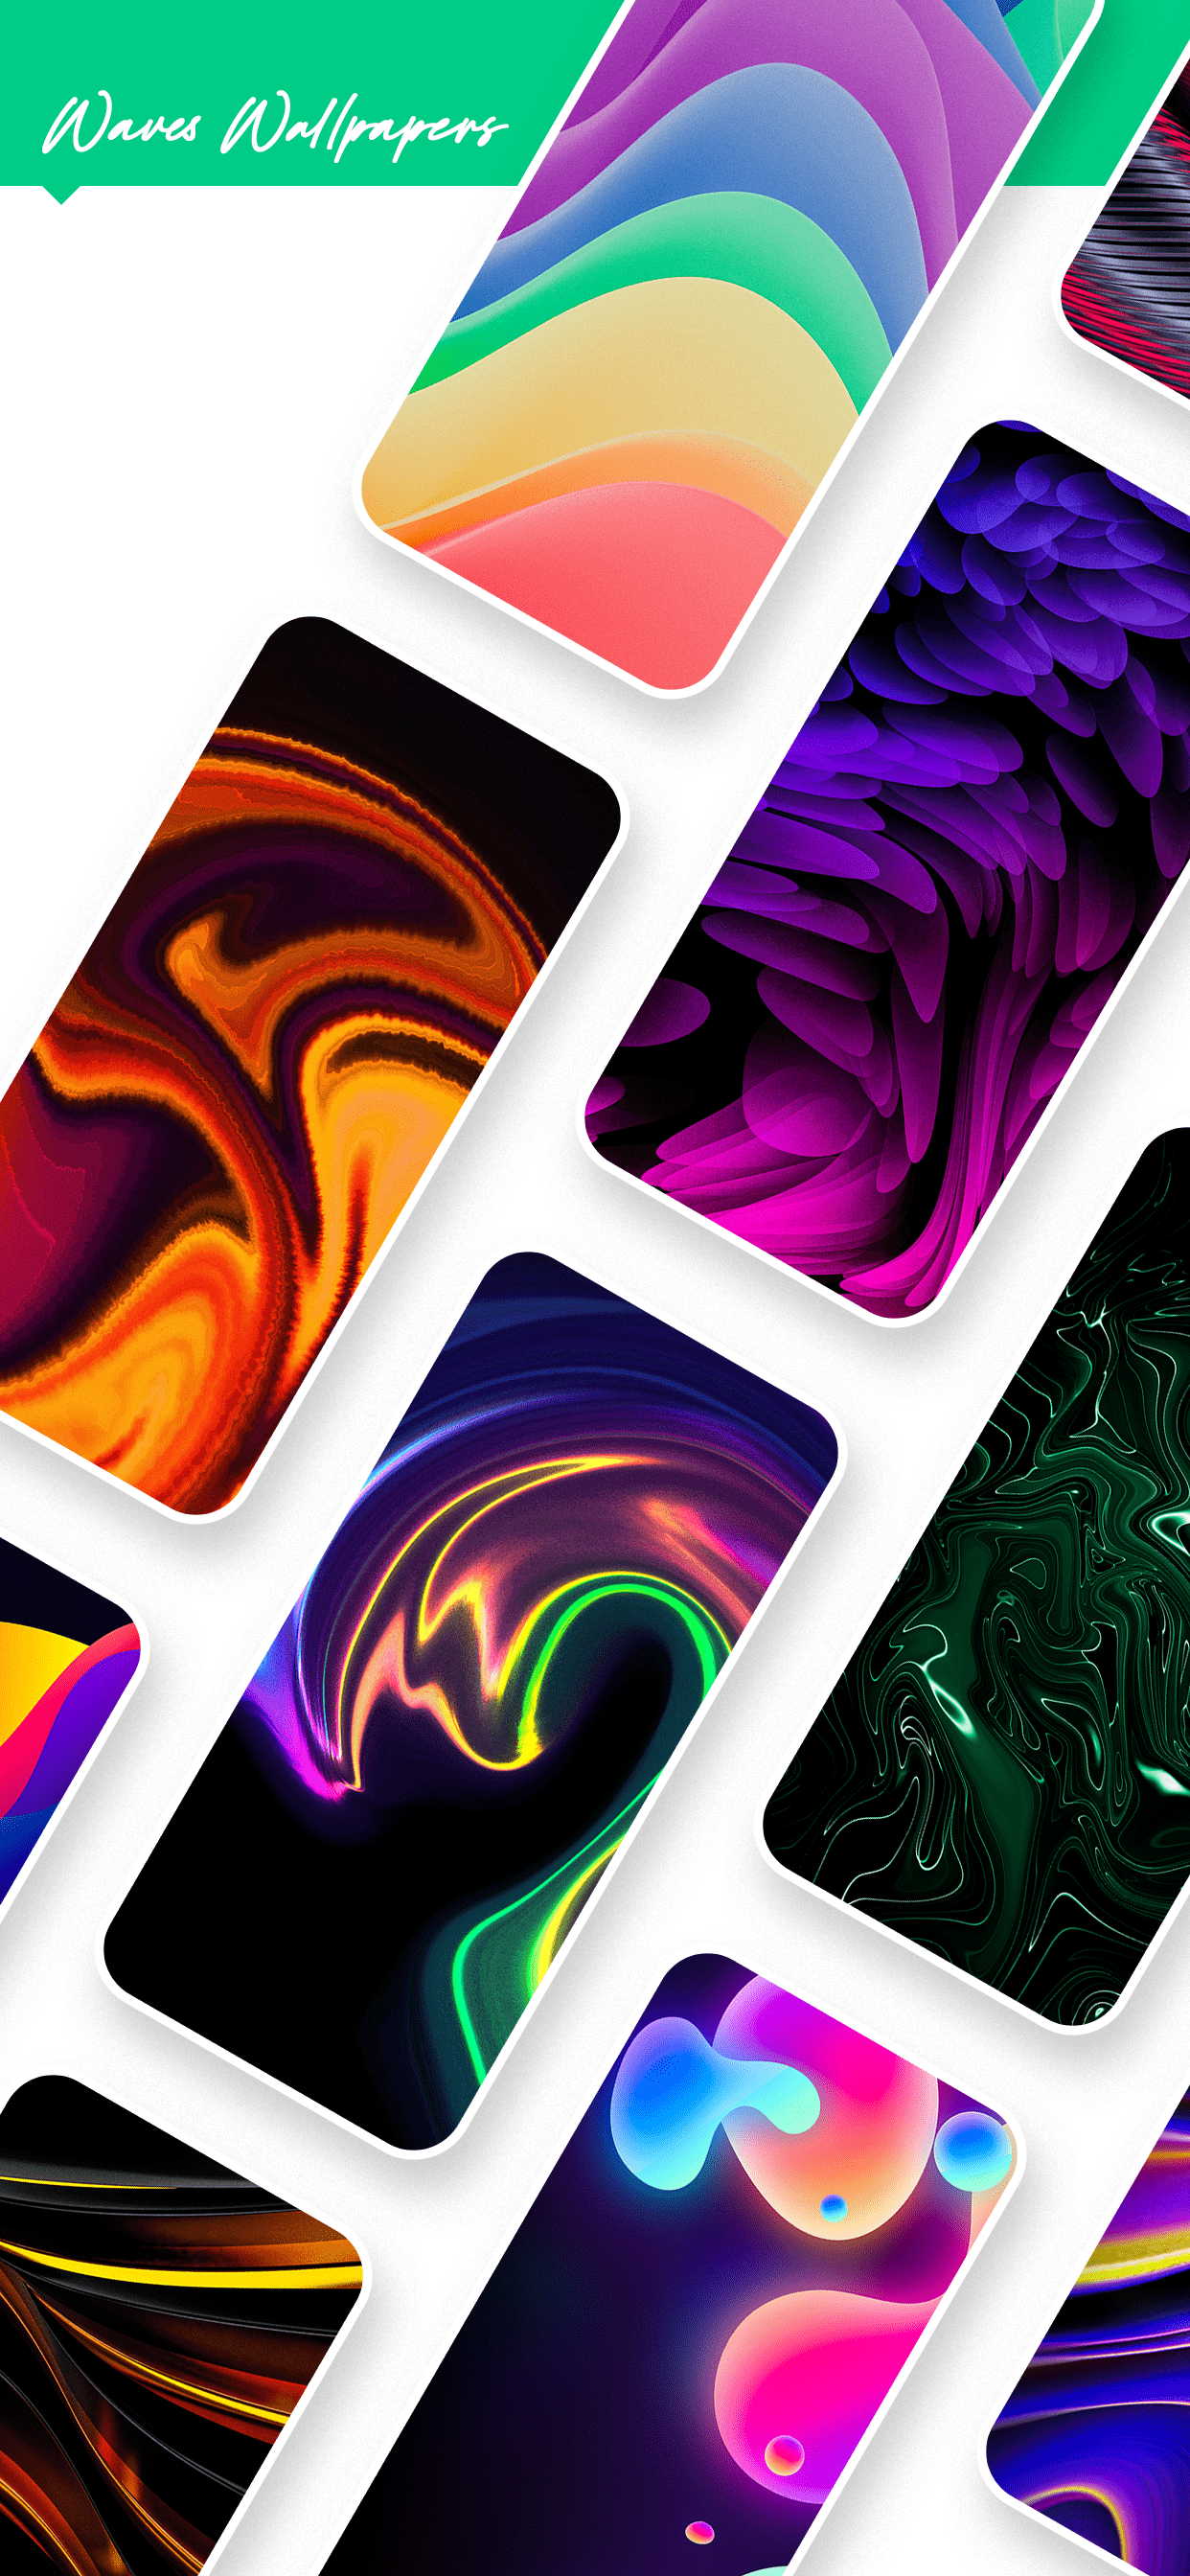 Waves-Wallpapers-7.png